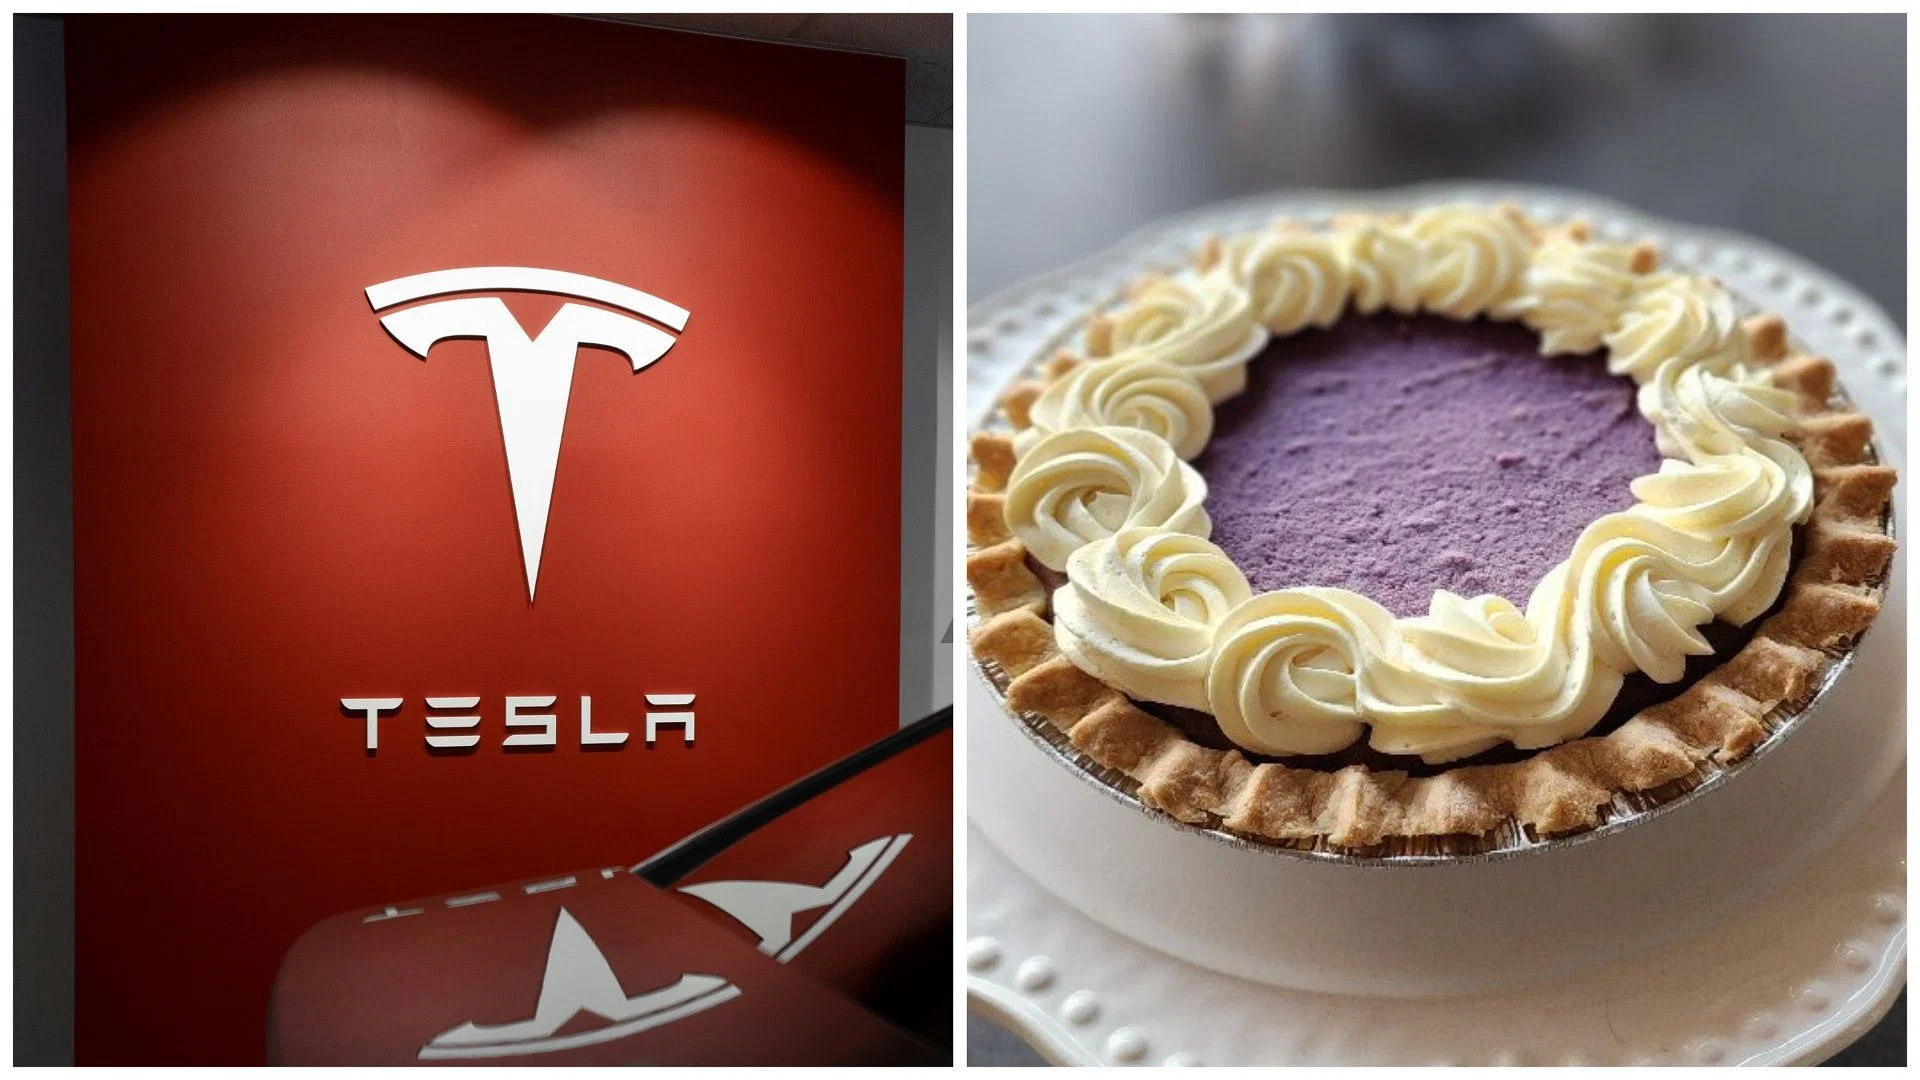 Tesla's Unexpected Turn: How a Big Pie Order Mix-Up Left a Local Bakery Facing a $16K Challenge